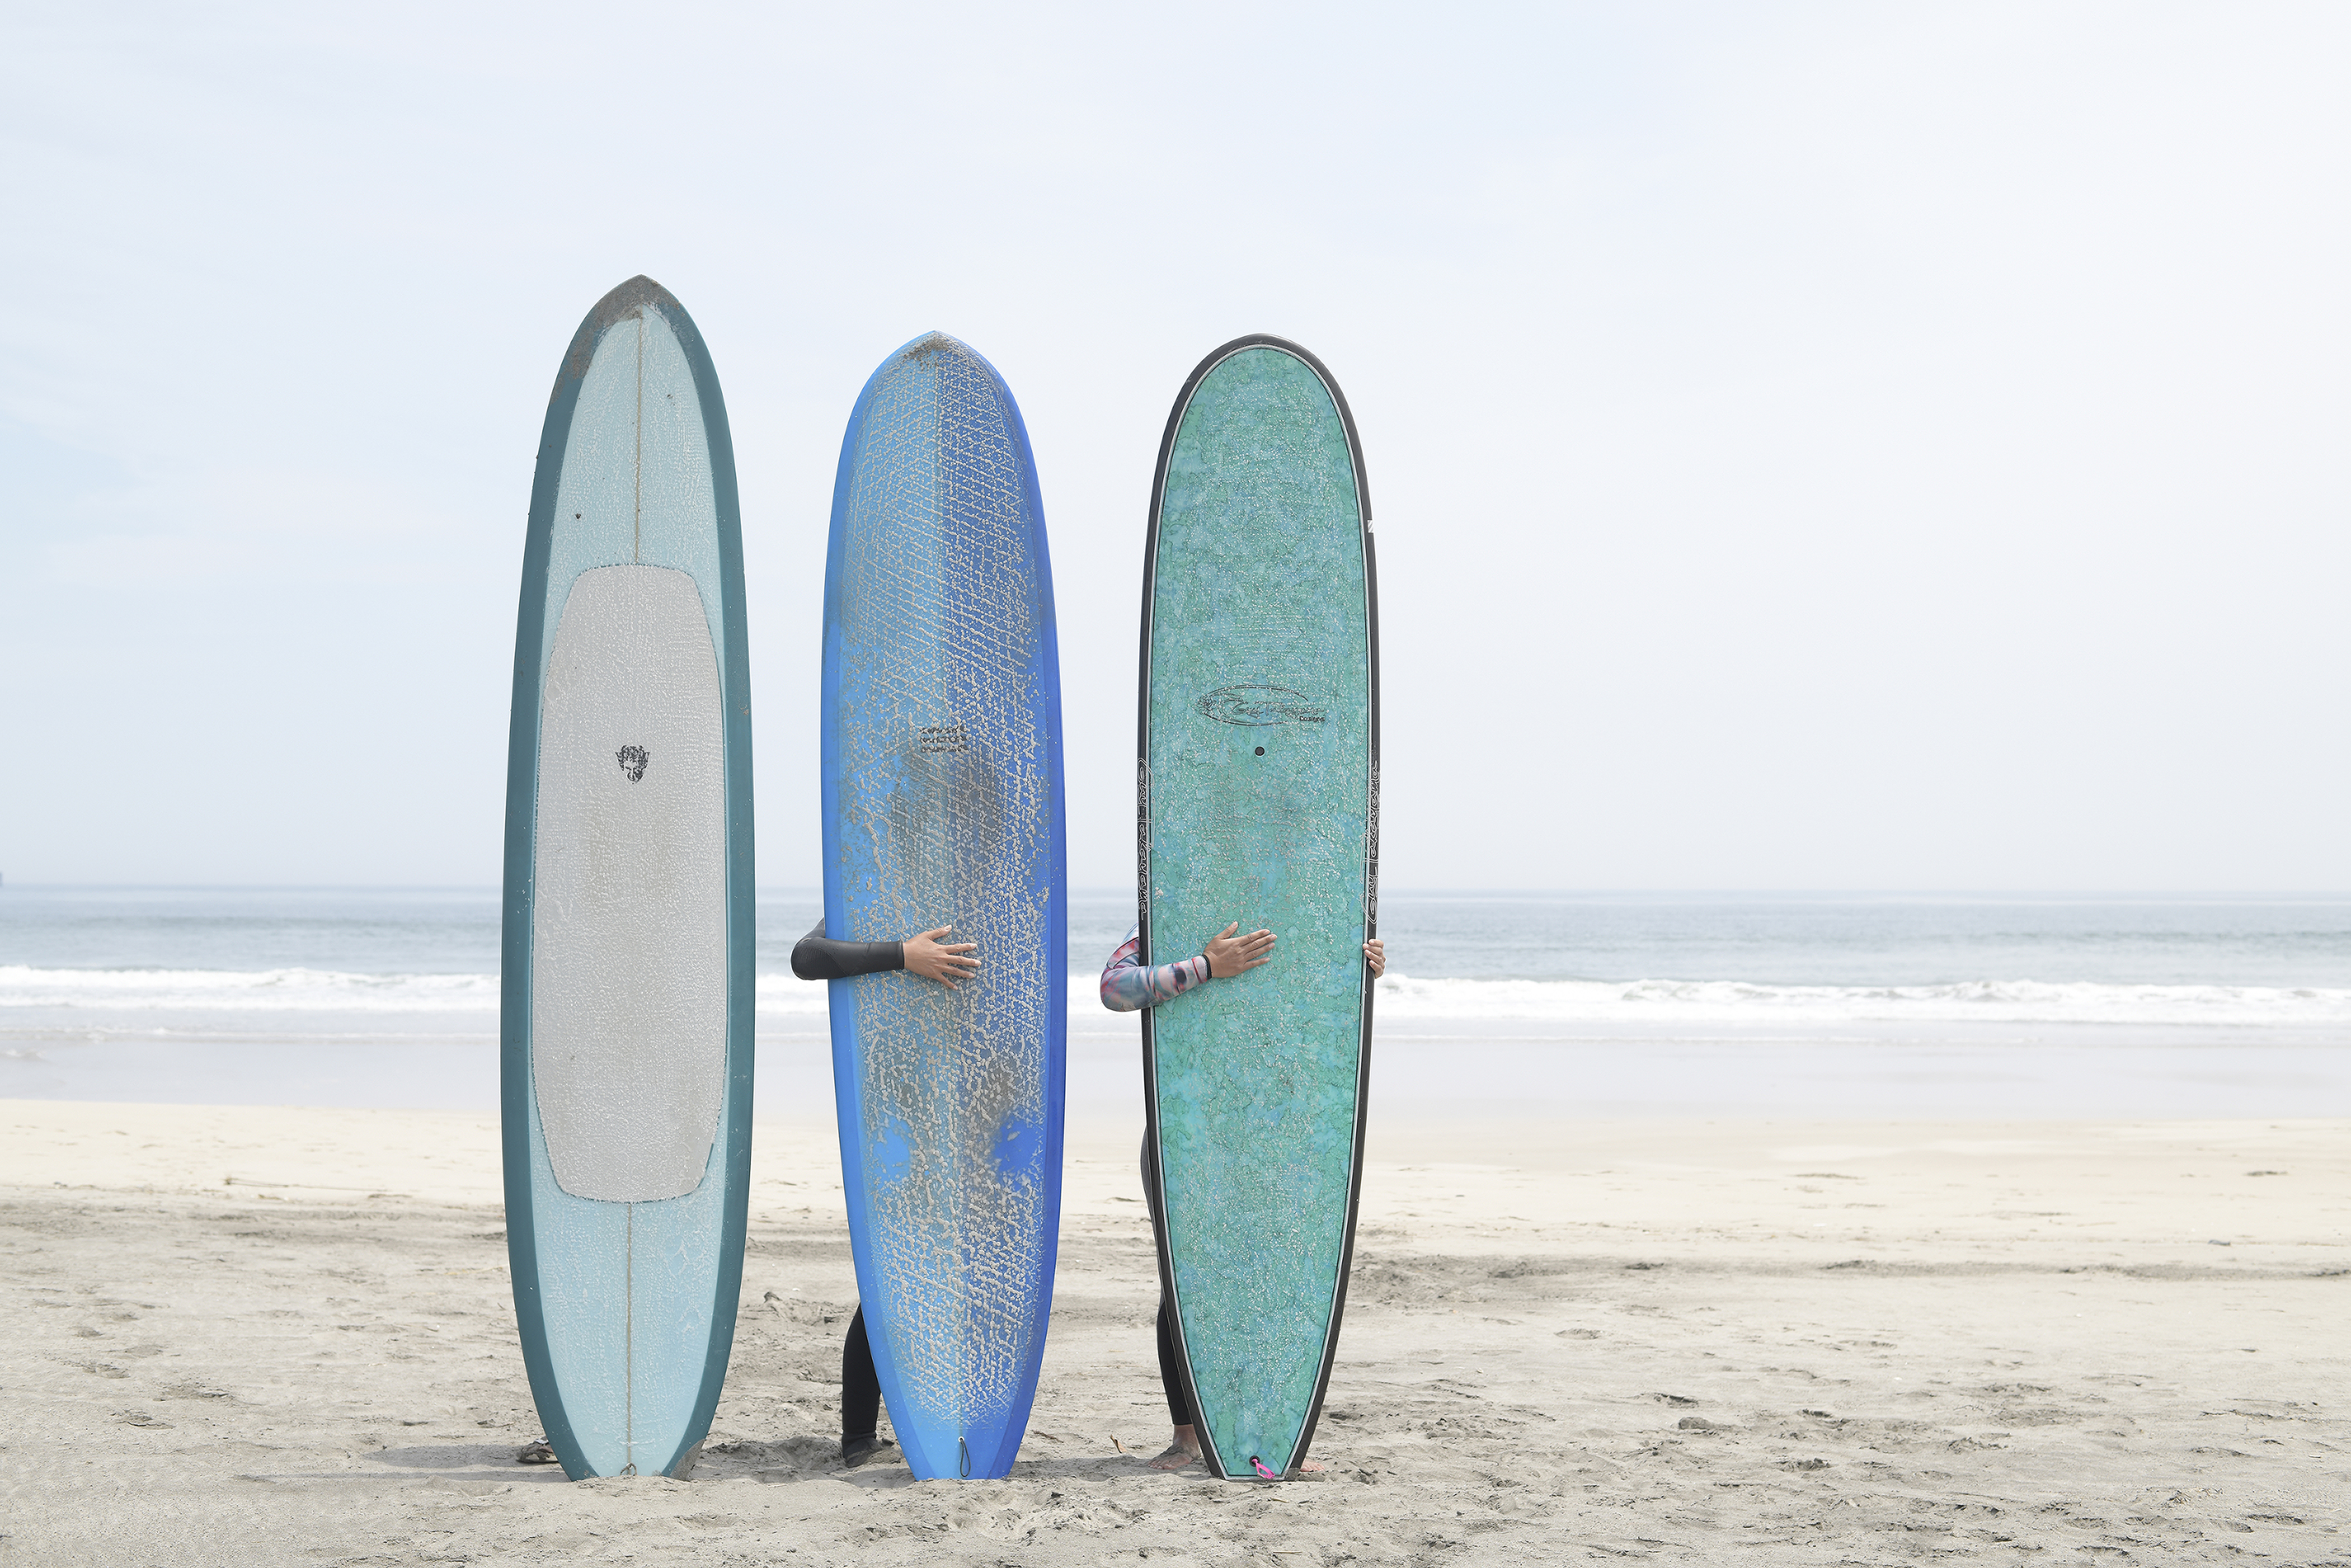 Kitaizumi Beach, Minamisoma, Fukushima Prefecture, Japan. Three surfers pose for a portrait behind their longboards on the beach.